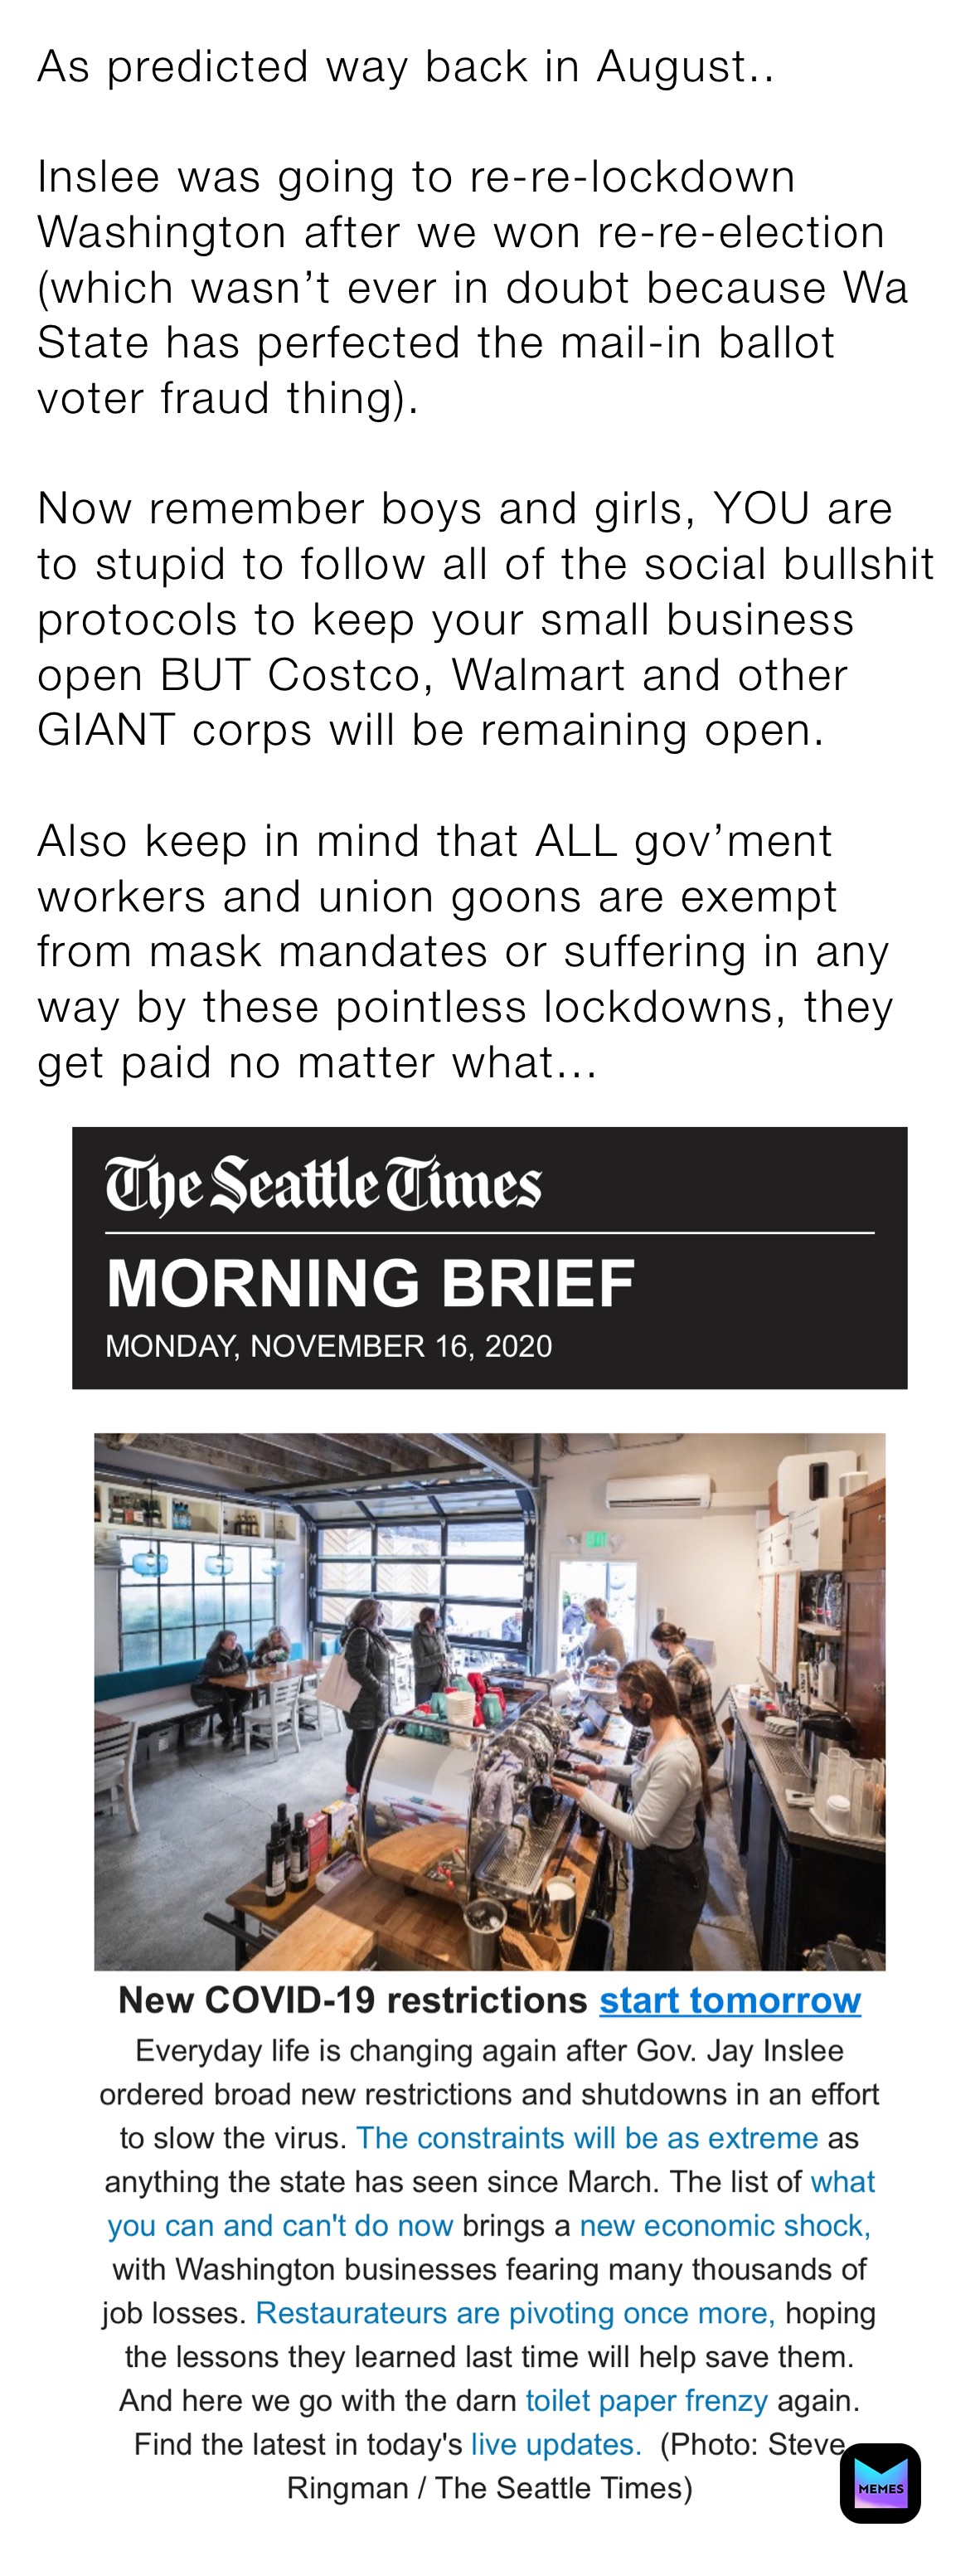 As predicted way back in August..

Inslee was going to re-re-lockdown Washington after we won re-re-election (which wasn’t ever in doubt because Wa State has perfected the mail-in ballot voter fraud thing). 

Now remember boys and girls, YOU are to stupid to follow all of the social bullshit protocols to keep your small business open BUT Costco, Walmart and other GIANT corps will be remaining open. 

Also keep in mind that ALL gov’ment workers and union goons are exempt from mask mandates or suffering in any way by these pointless lockdowns, they get paid no matter what...